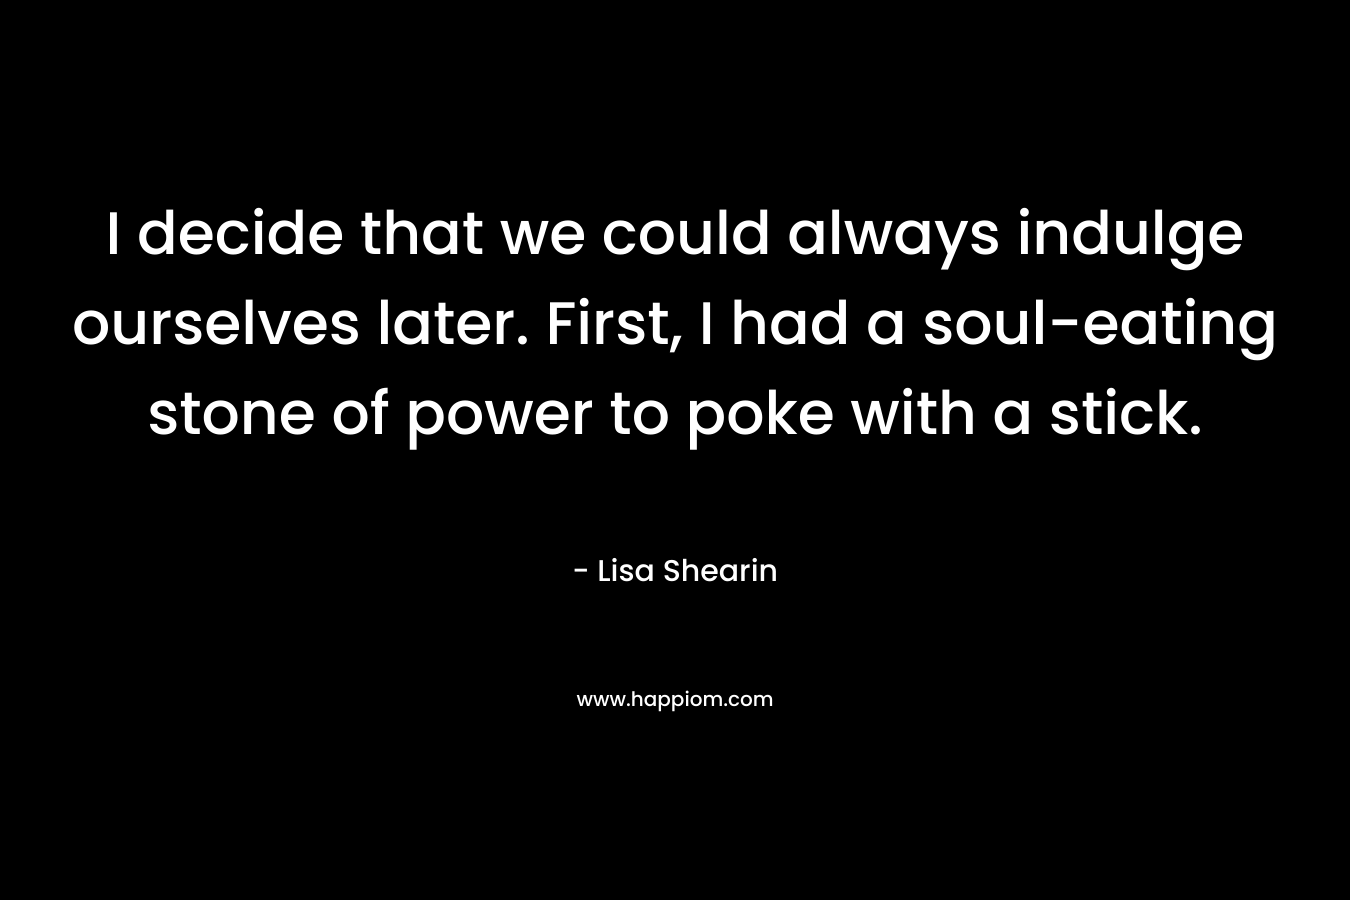 I decide that we could always indulge ourselves later. First, I had a soul-eating stone of power to poke with a stick. – Lisa Shearin